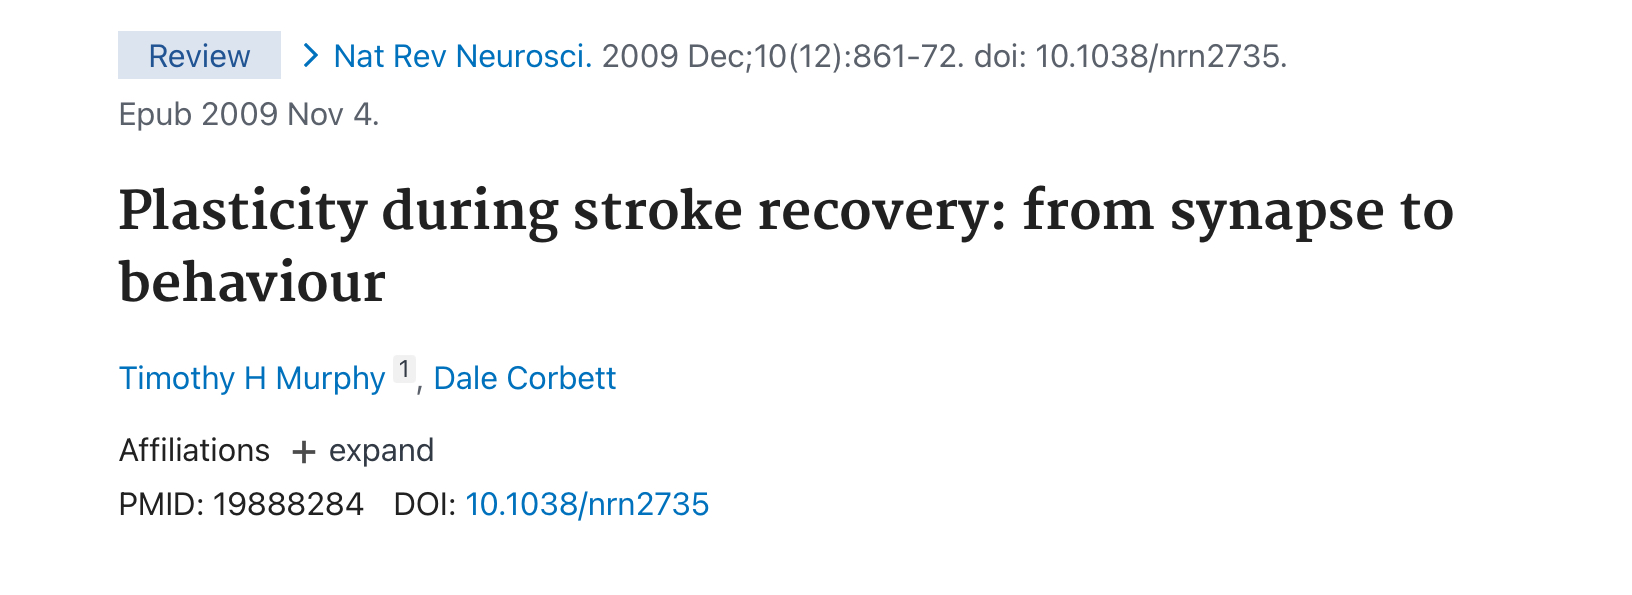 Plasticity during stroke recovery: from synapse to behaviour